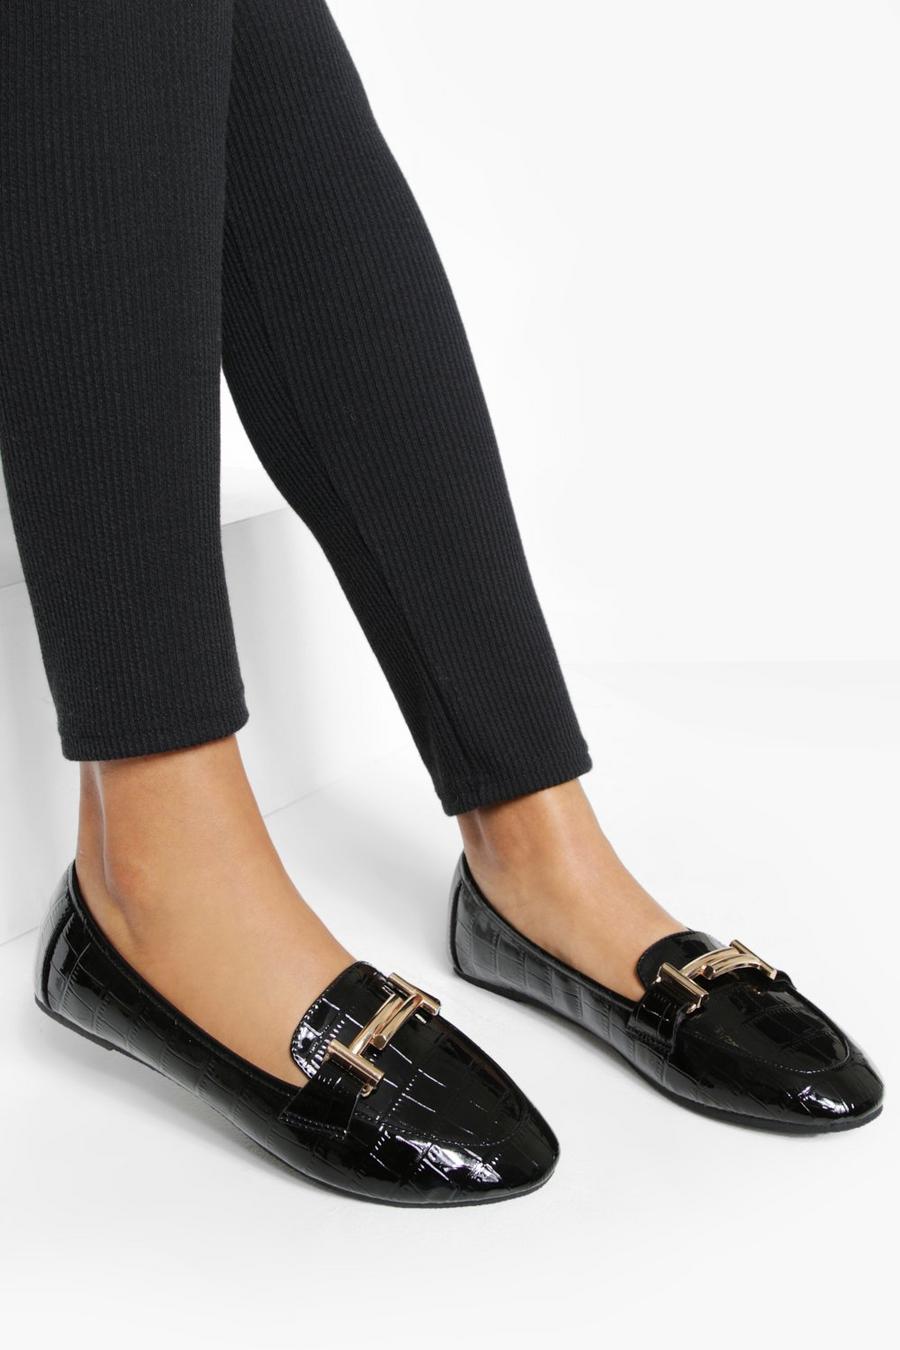 Black Wide Fit Patent Croc Double Bar Loafers